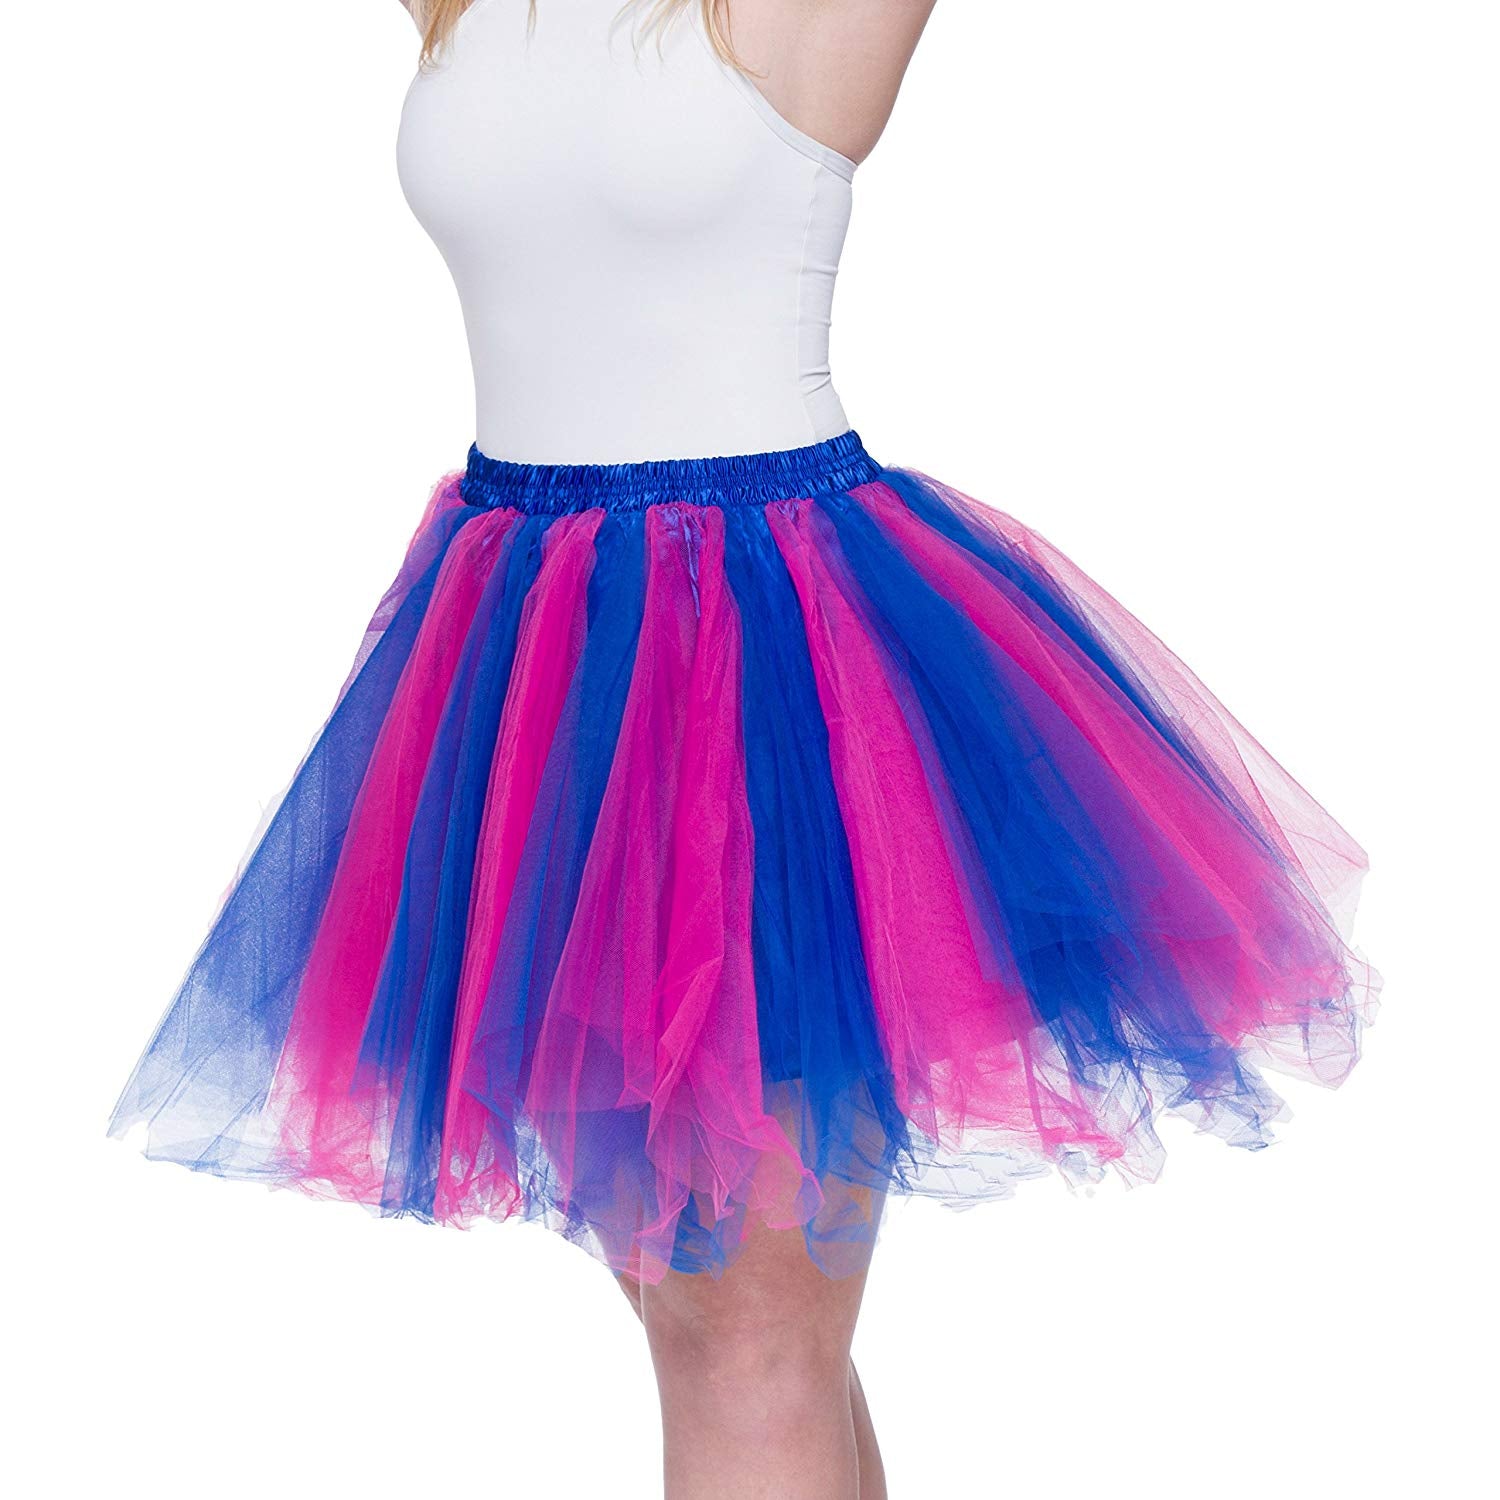 Tutu Skirt for Adults Blue Pink